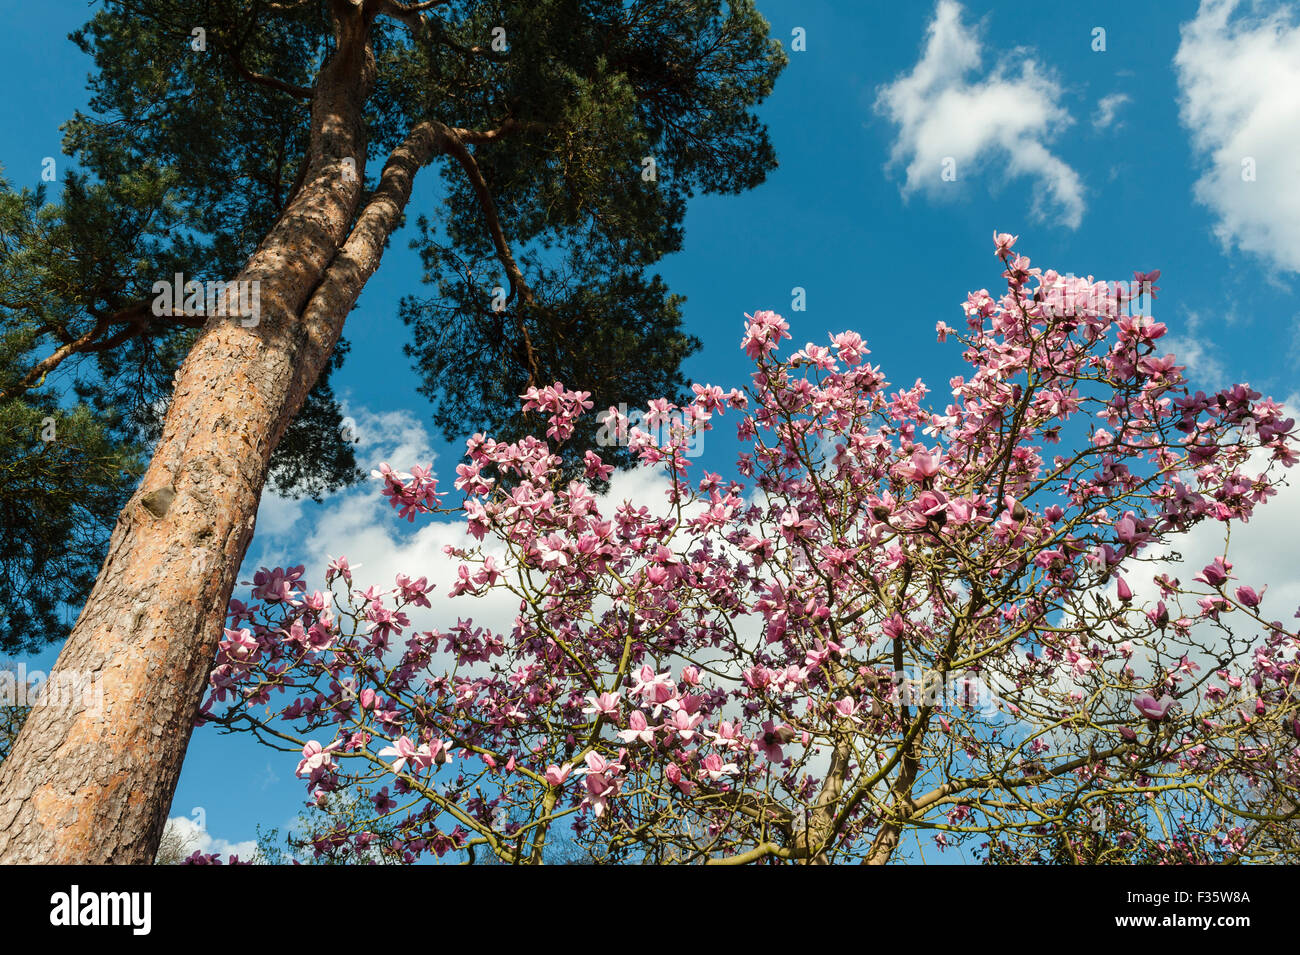 The Royal Horticultural Society (RHS) gardens at Wisley, Surrey, UK. Magnolia in spring Stock Photo